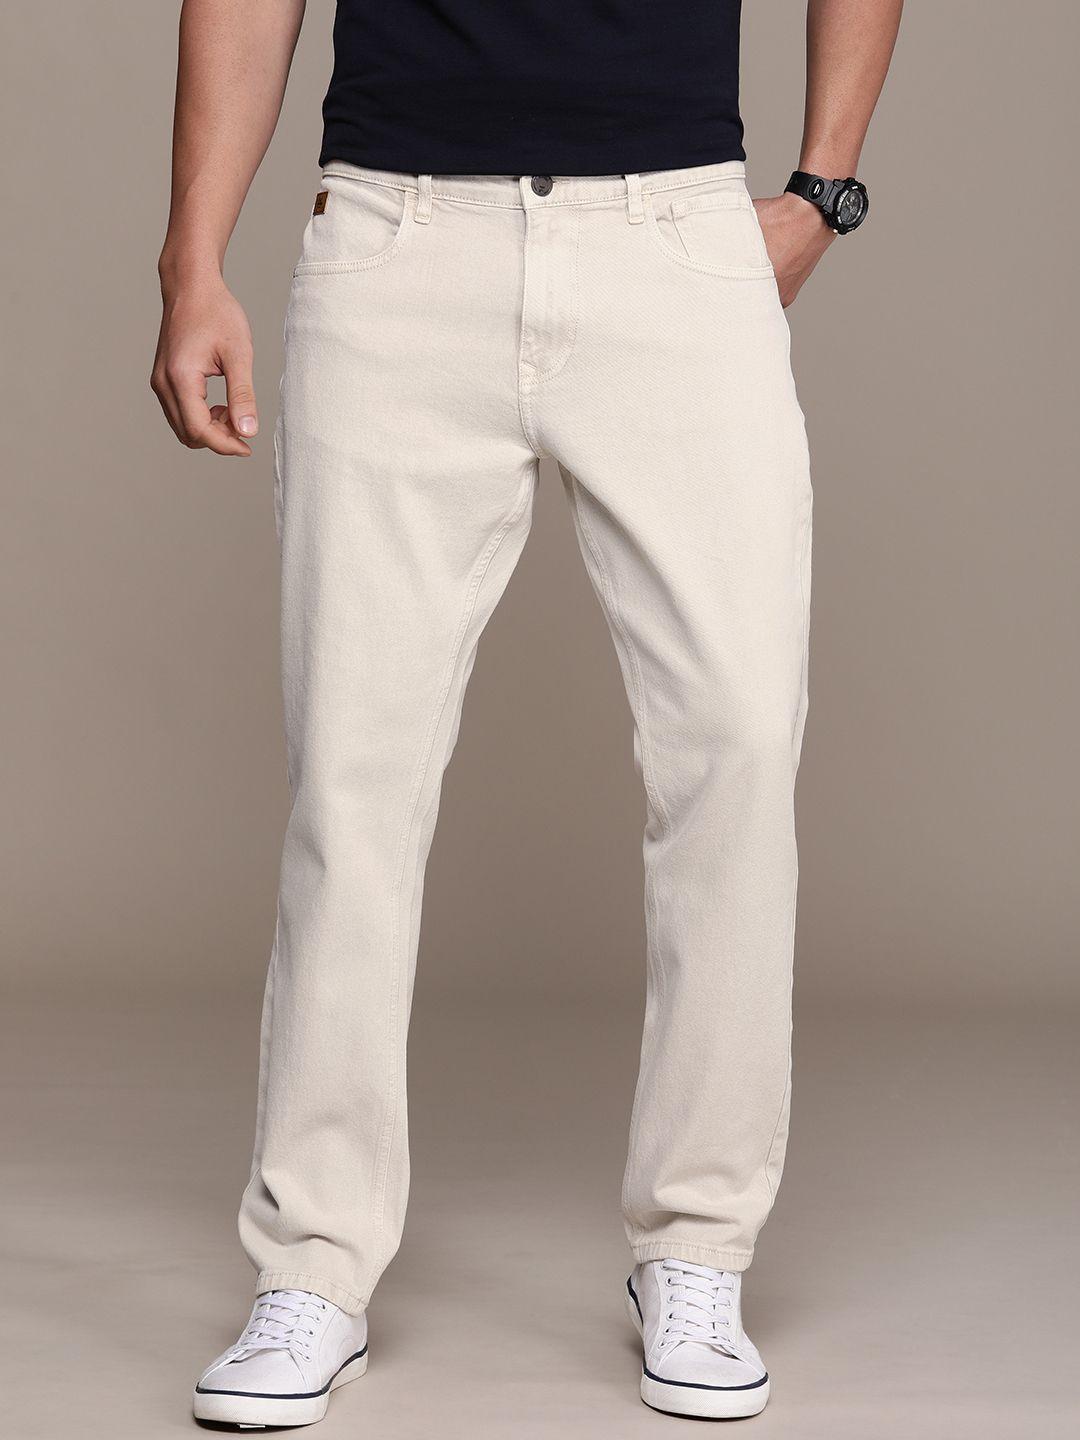 wrogn-men-relaxed-fit-stretchable-jeans